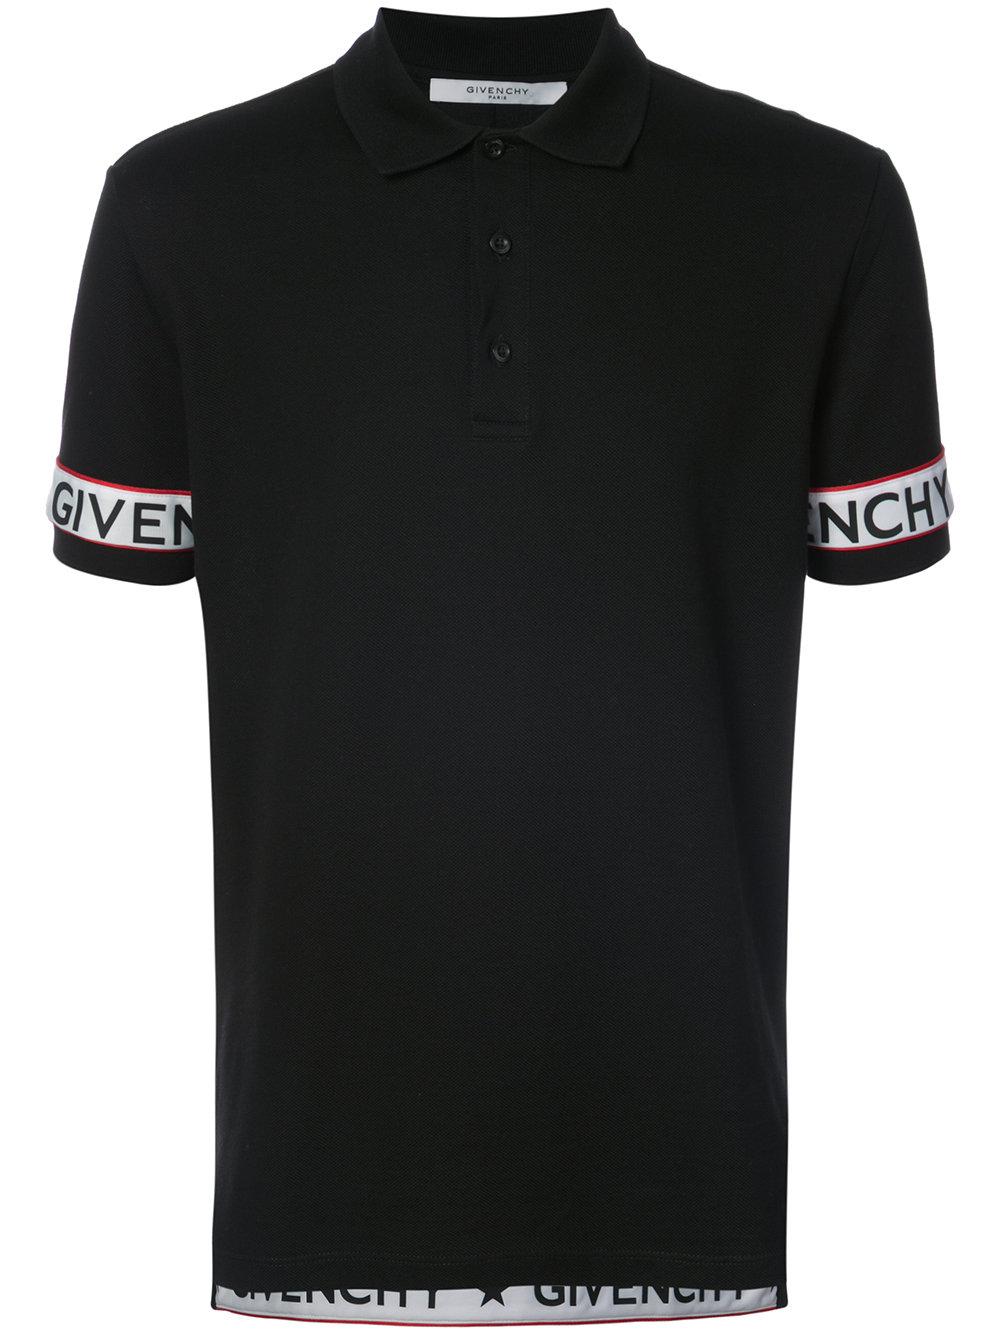 Givenchy Cotton Logo Band Polo Shirt in Black for Men - Lyst